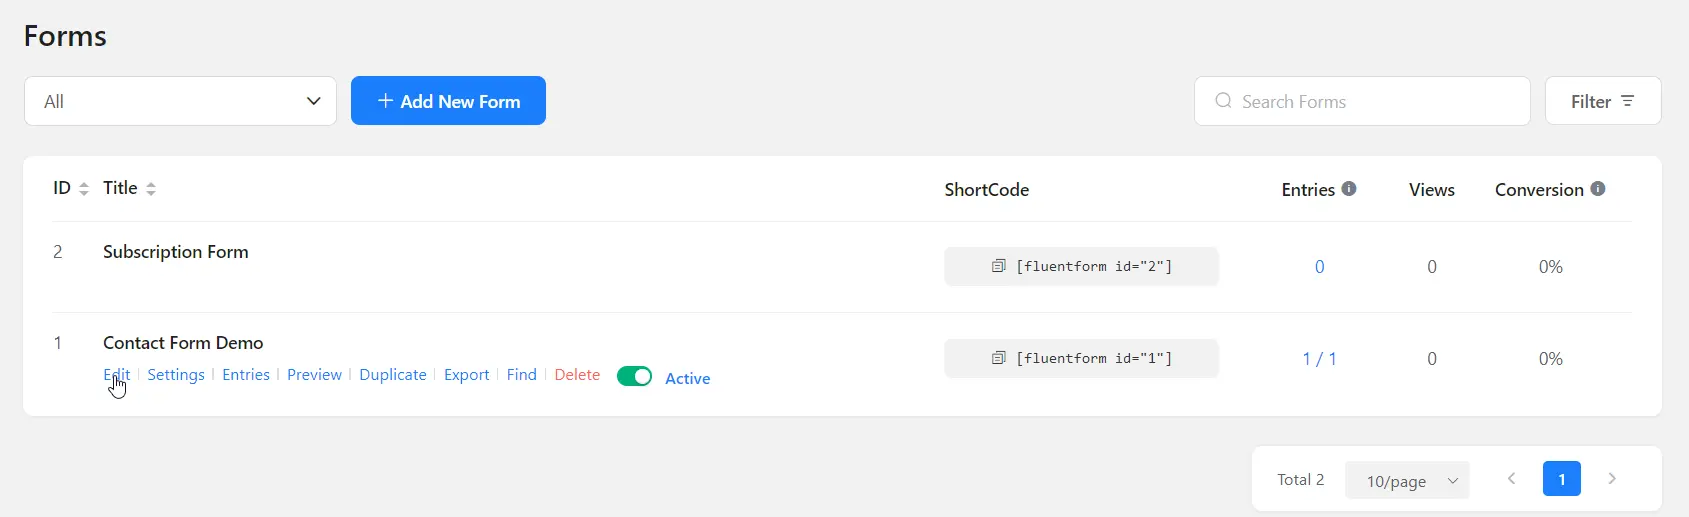 WordPress Fluent Form with OTP - Click Save Settings